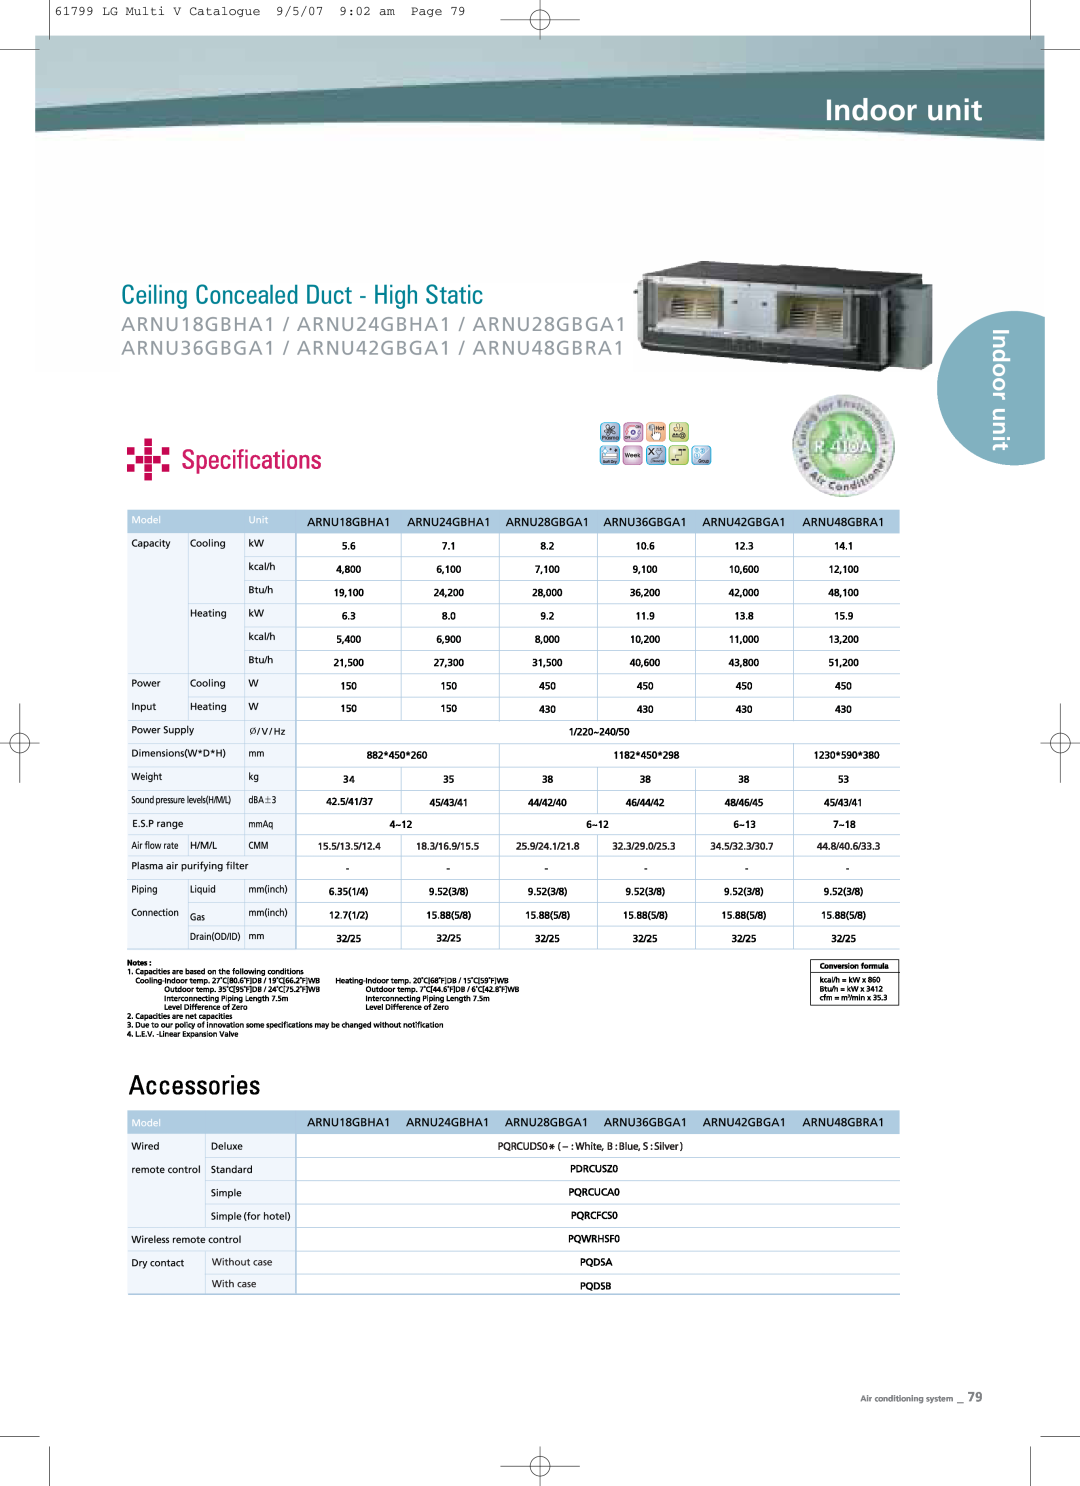 LG Electronics PRHR040 Ceiling Concealed Duct - High Static, Indoor unit, unit Specifications, Air conditioning system 